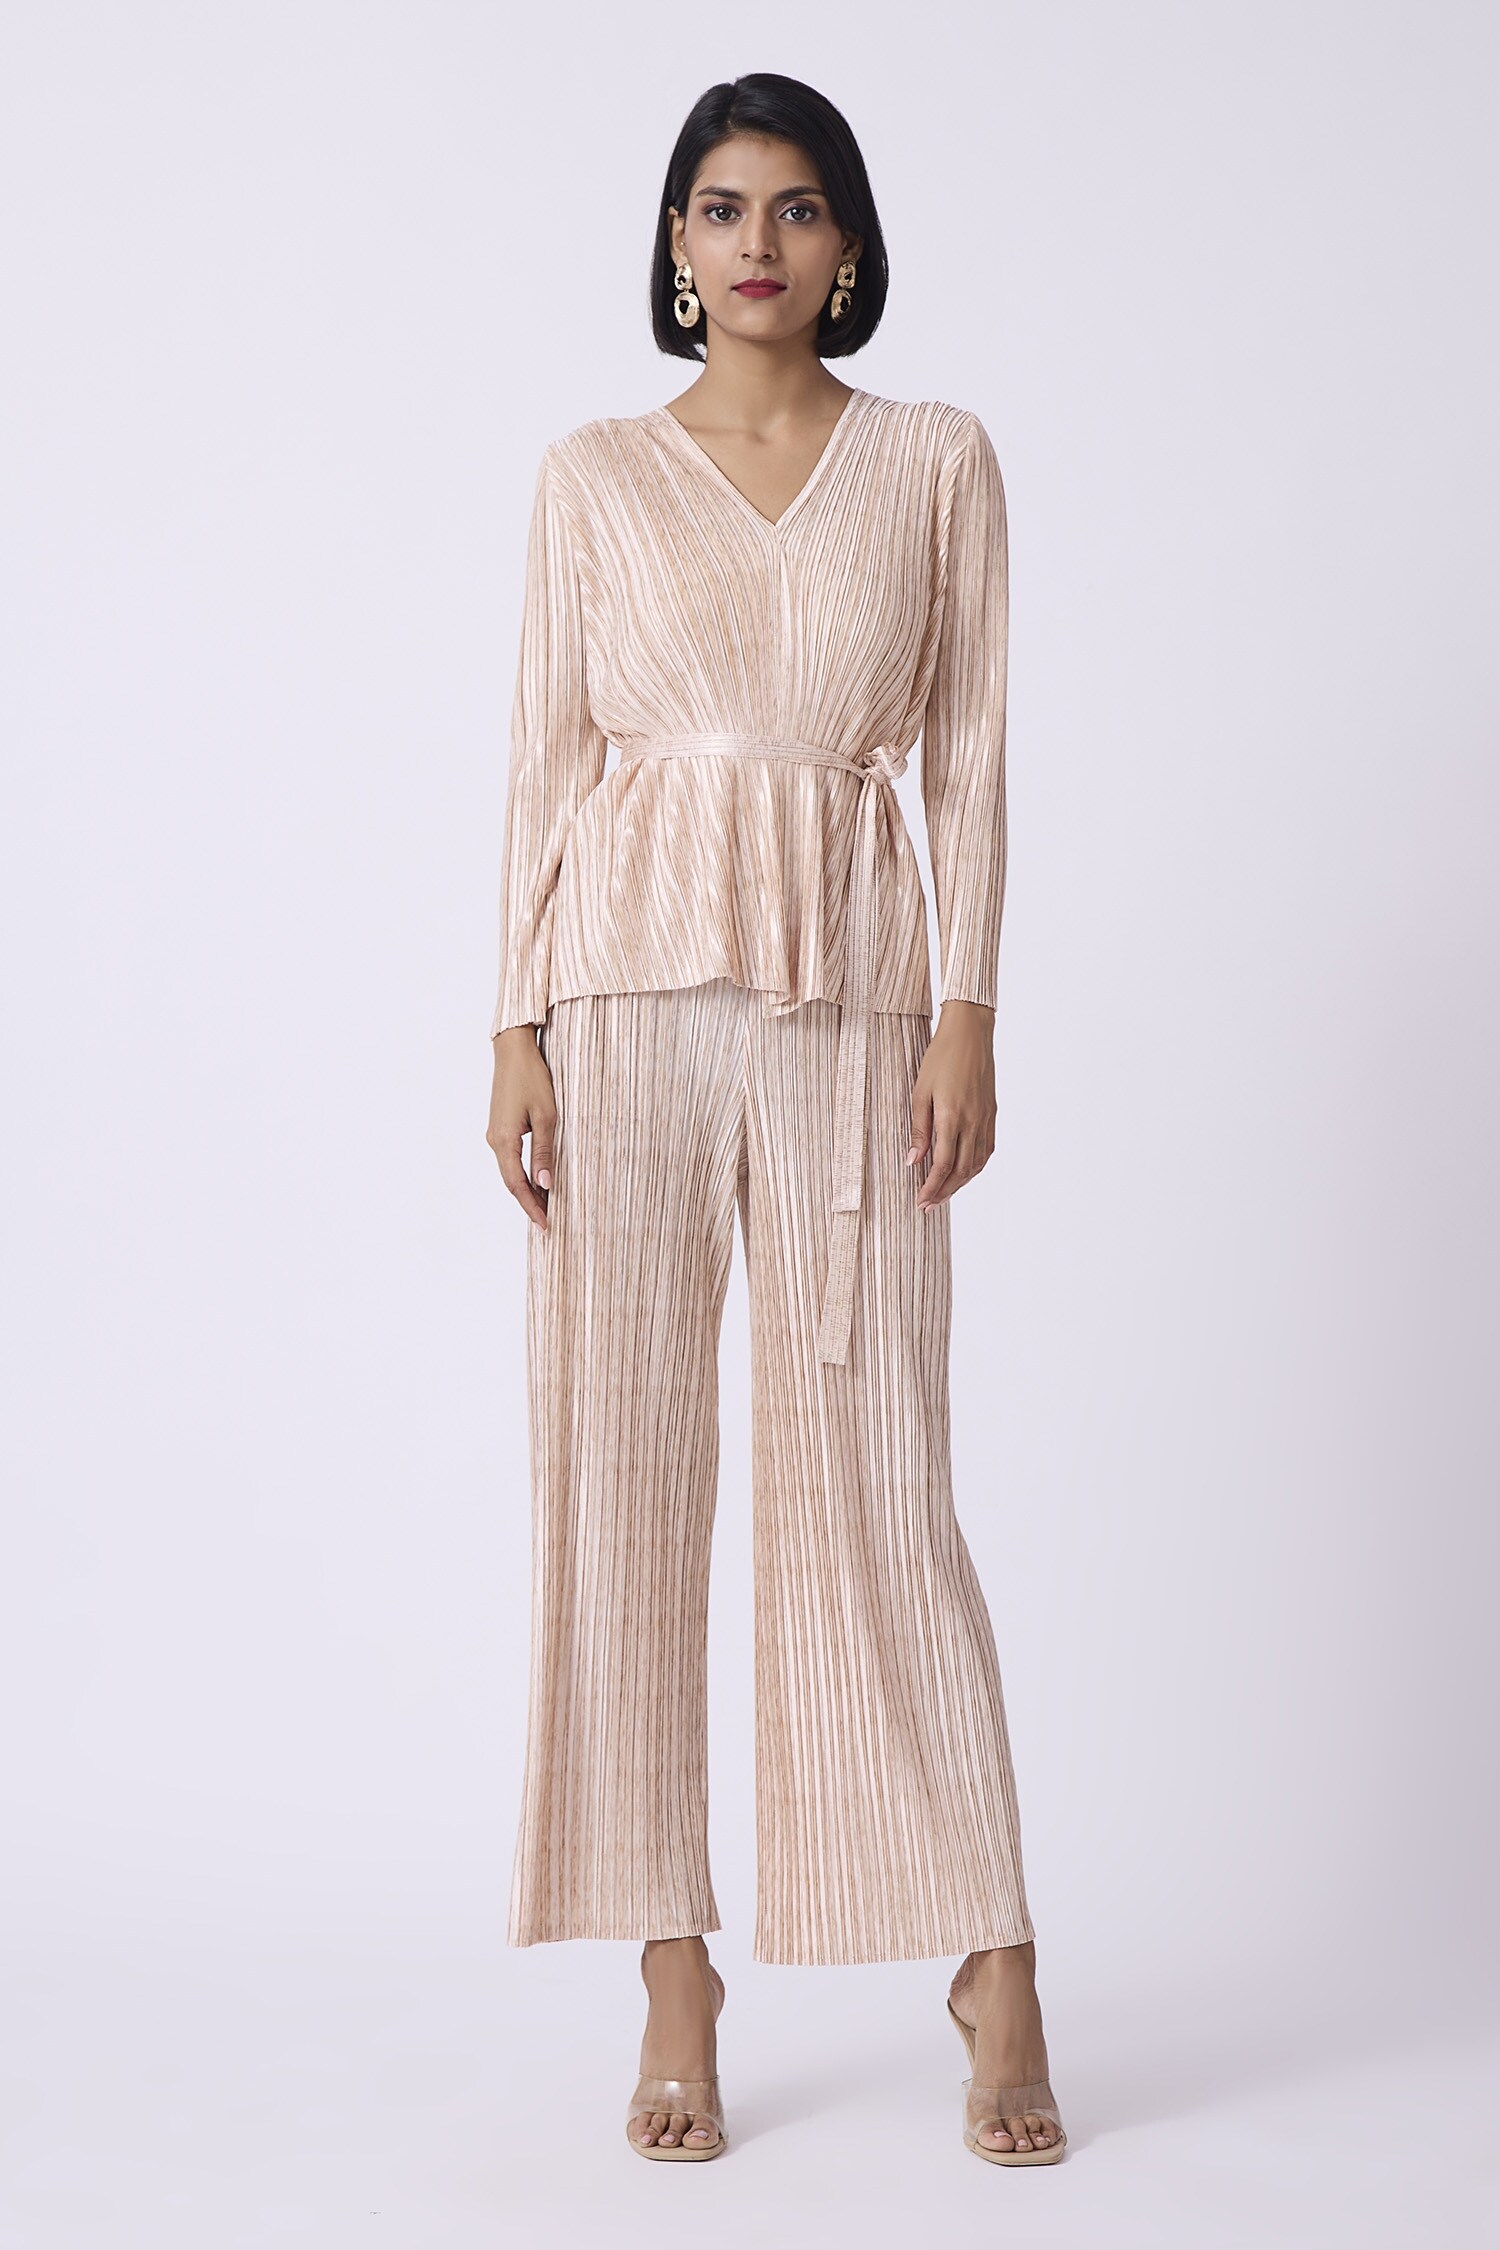 Scarlet Sage Cream Pleated Top And Pant Set